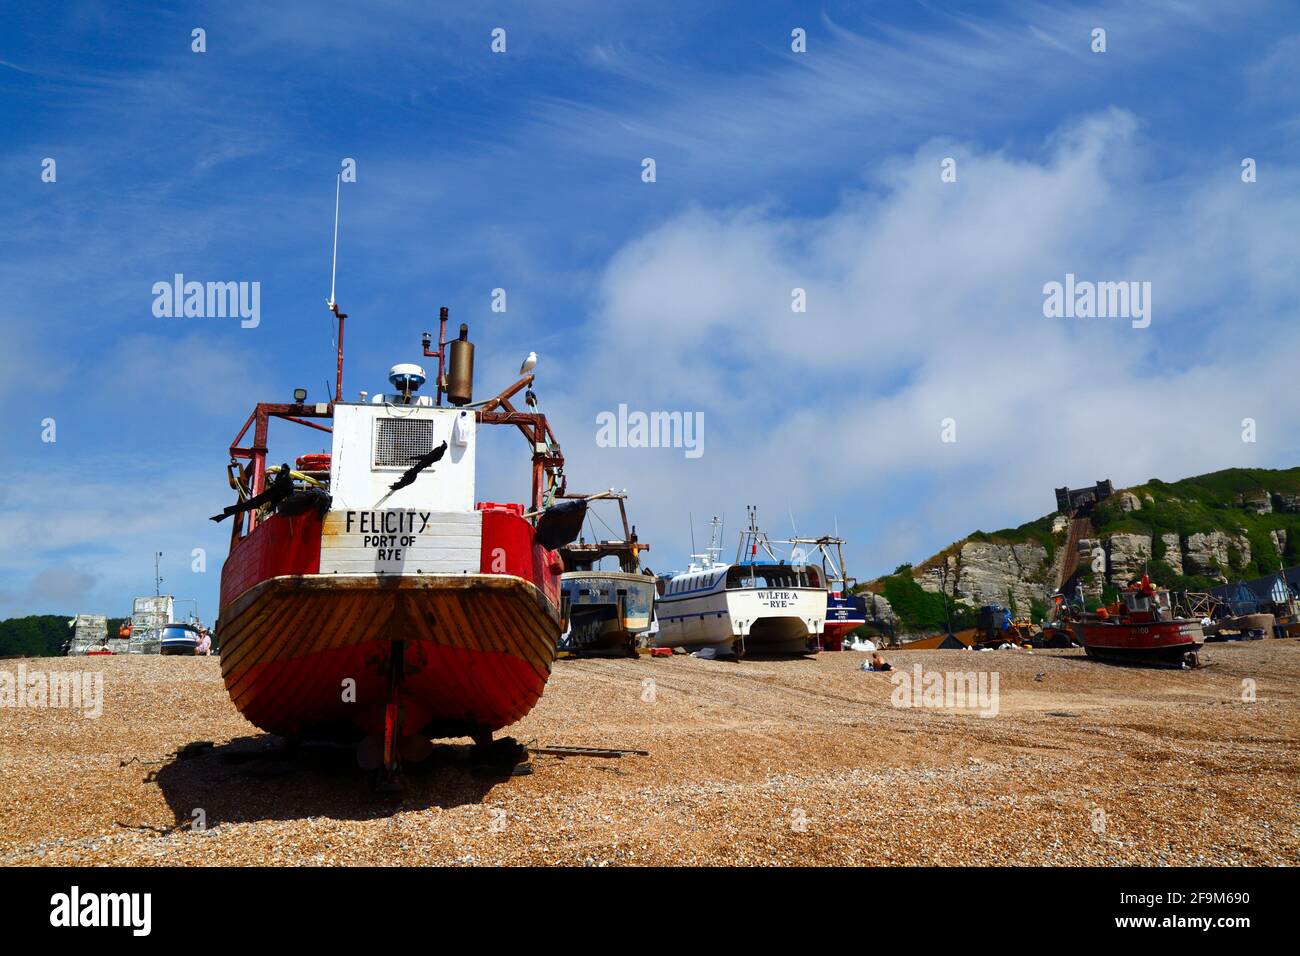 Fishing boat registered in Port of Rye on The Stade shingle beach, East Hill Cliff in background, Hastings, East Sussex, England, UK Stock Photo